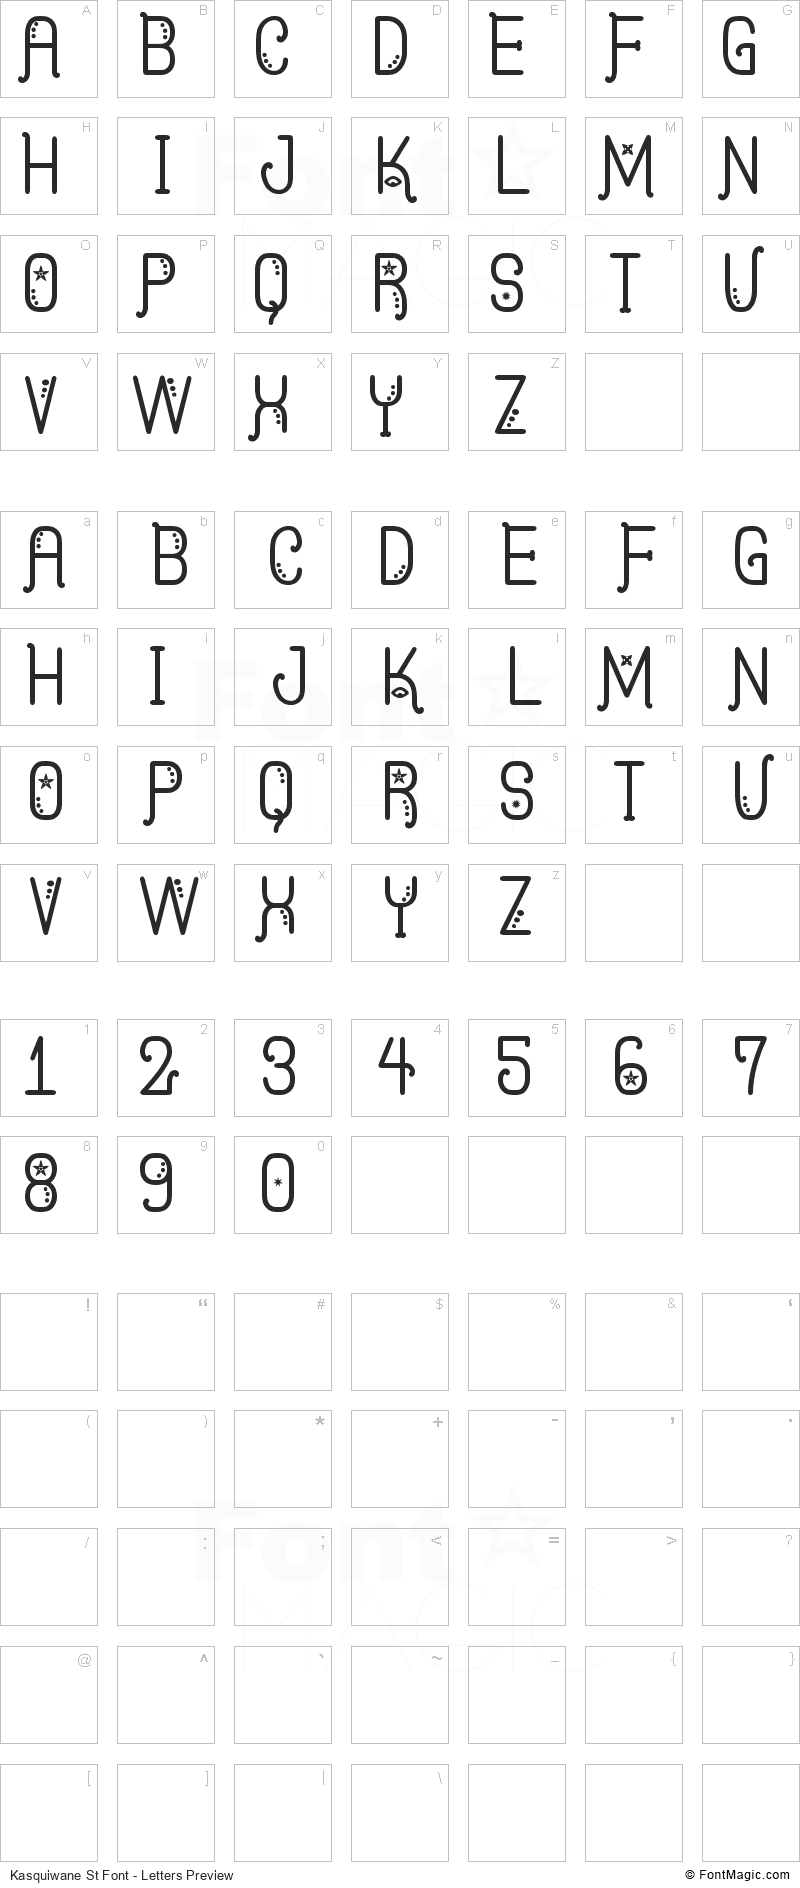 Kasquiwane St Font - All Latters Preview Chart